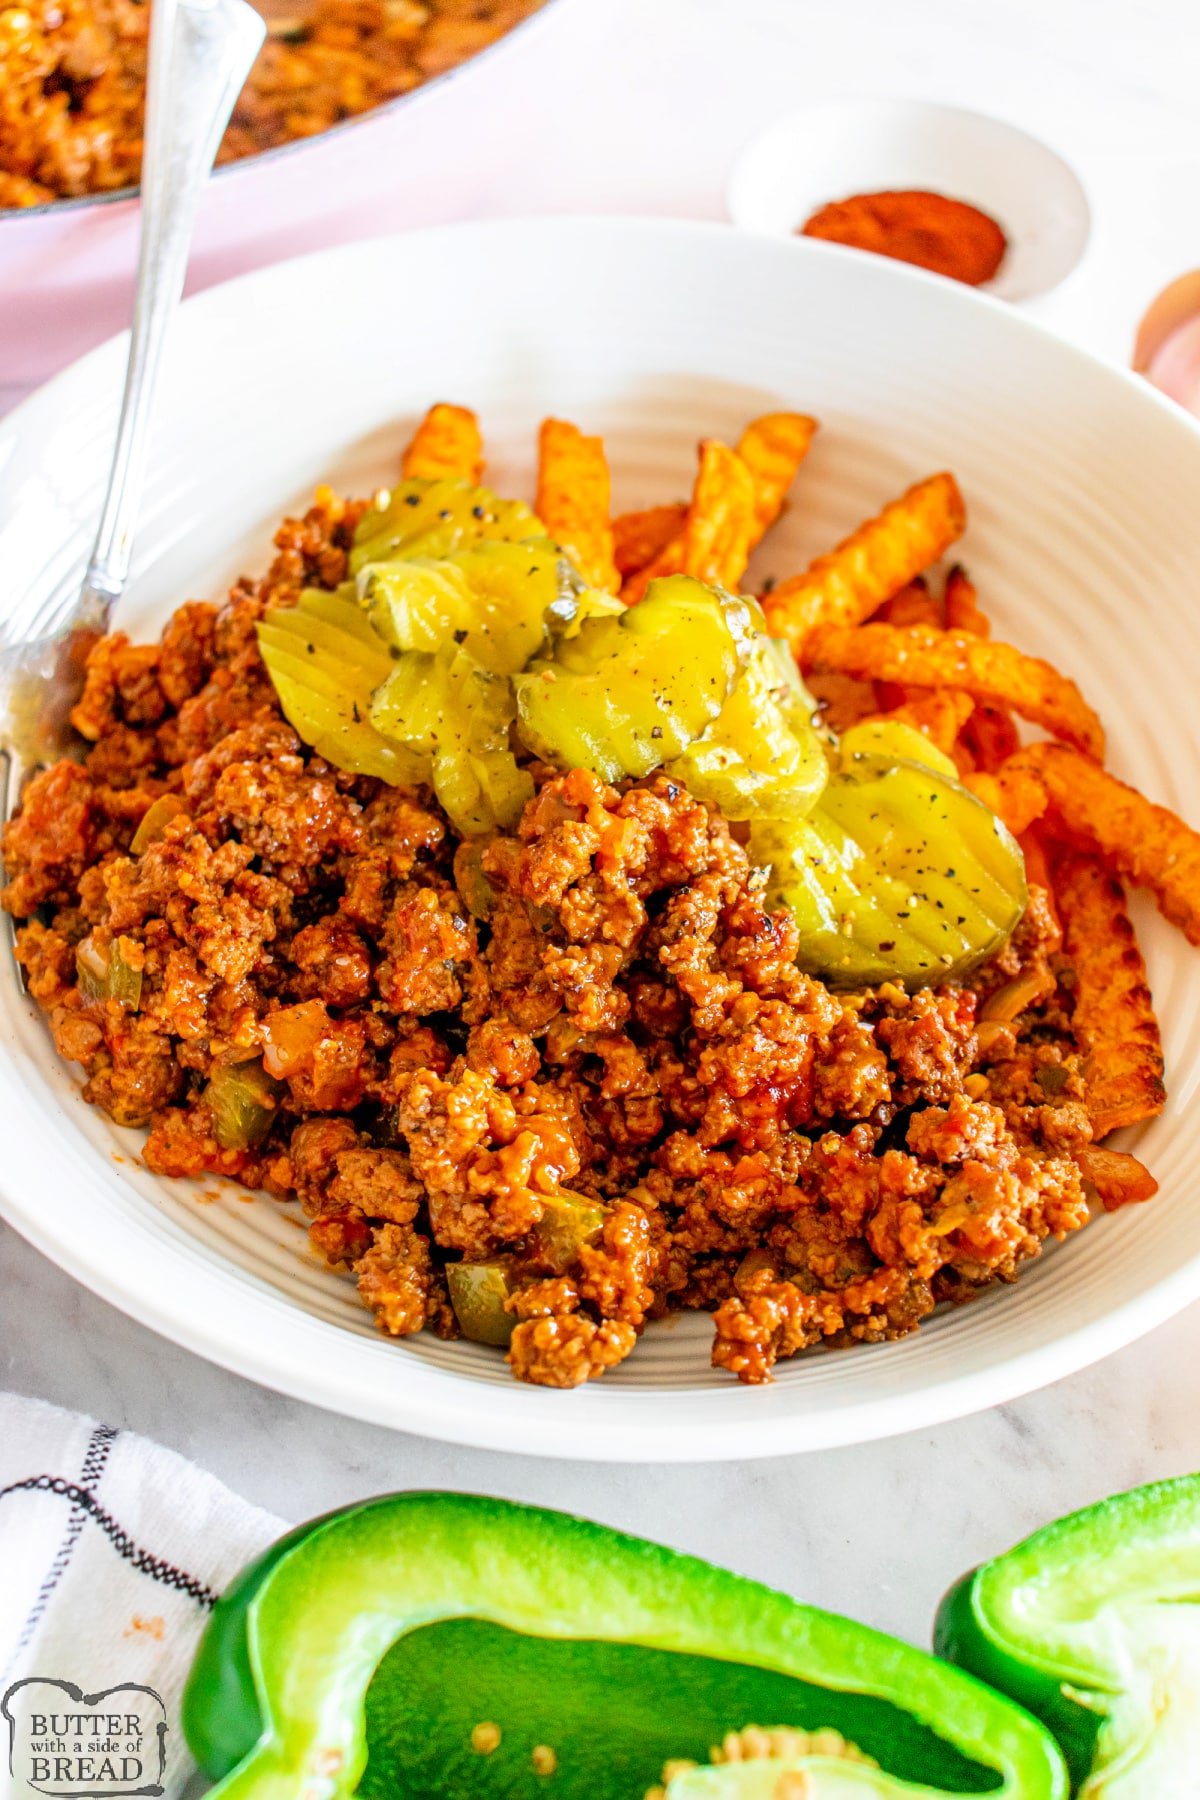 Sloppy Joe Bowls are made with ground beef, onions, and peppers cooked with lots of spice and flavors. This recipe is a delicious high-protein, low-carb meal that is ready to eat in less than 20 minutes! 